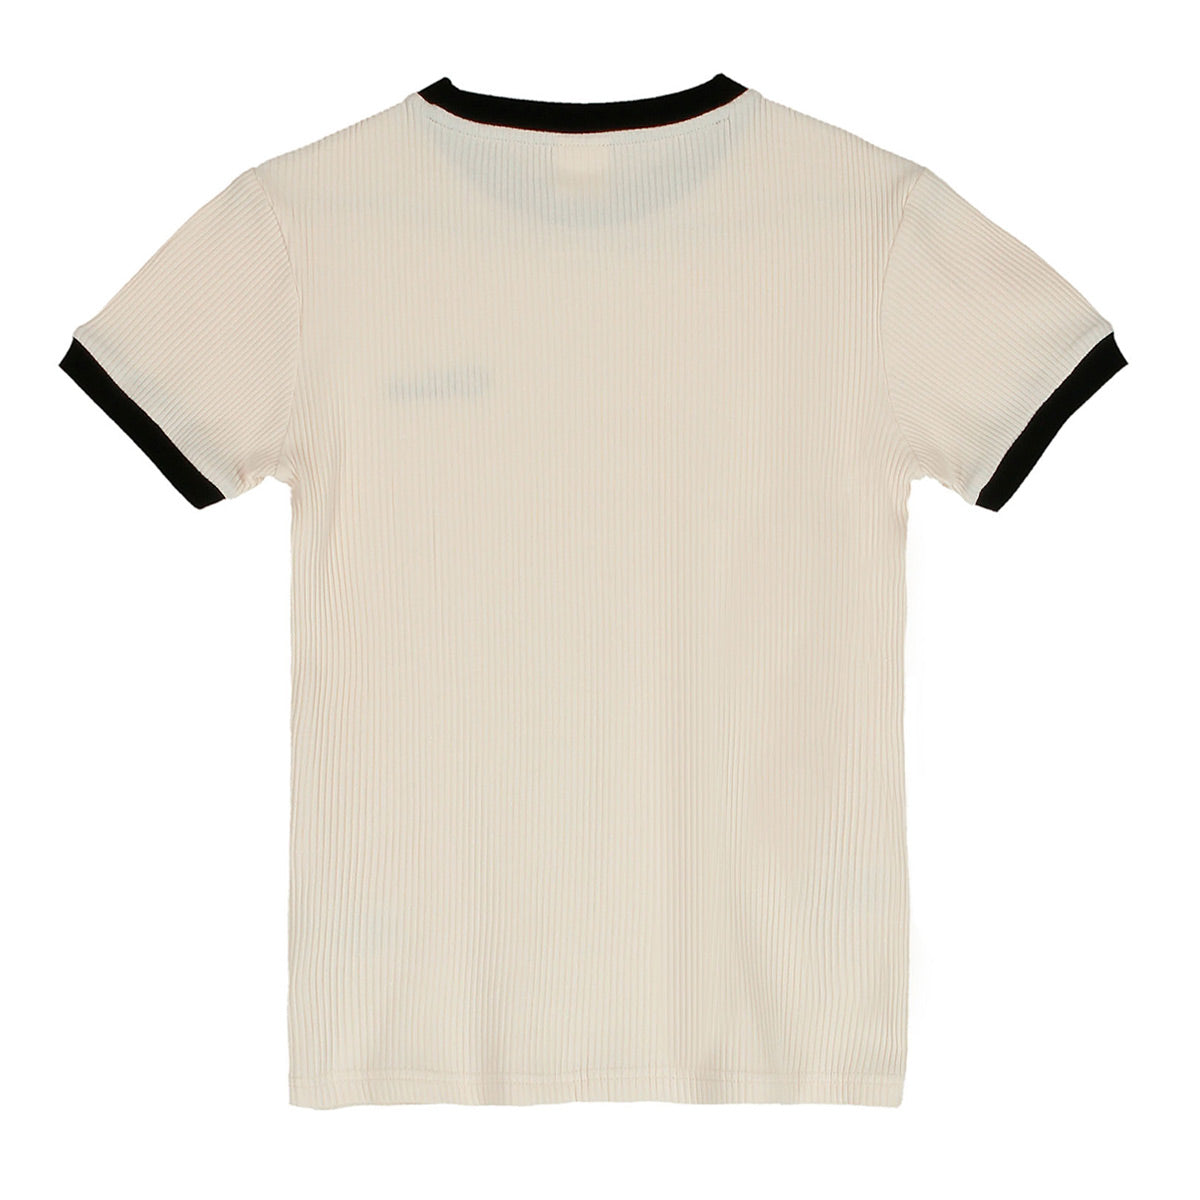 Camiseta canalé mujer (Off White)